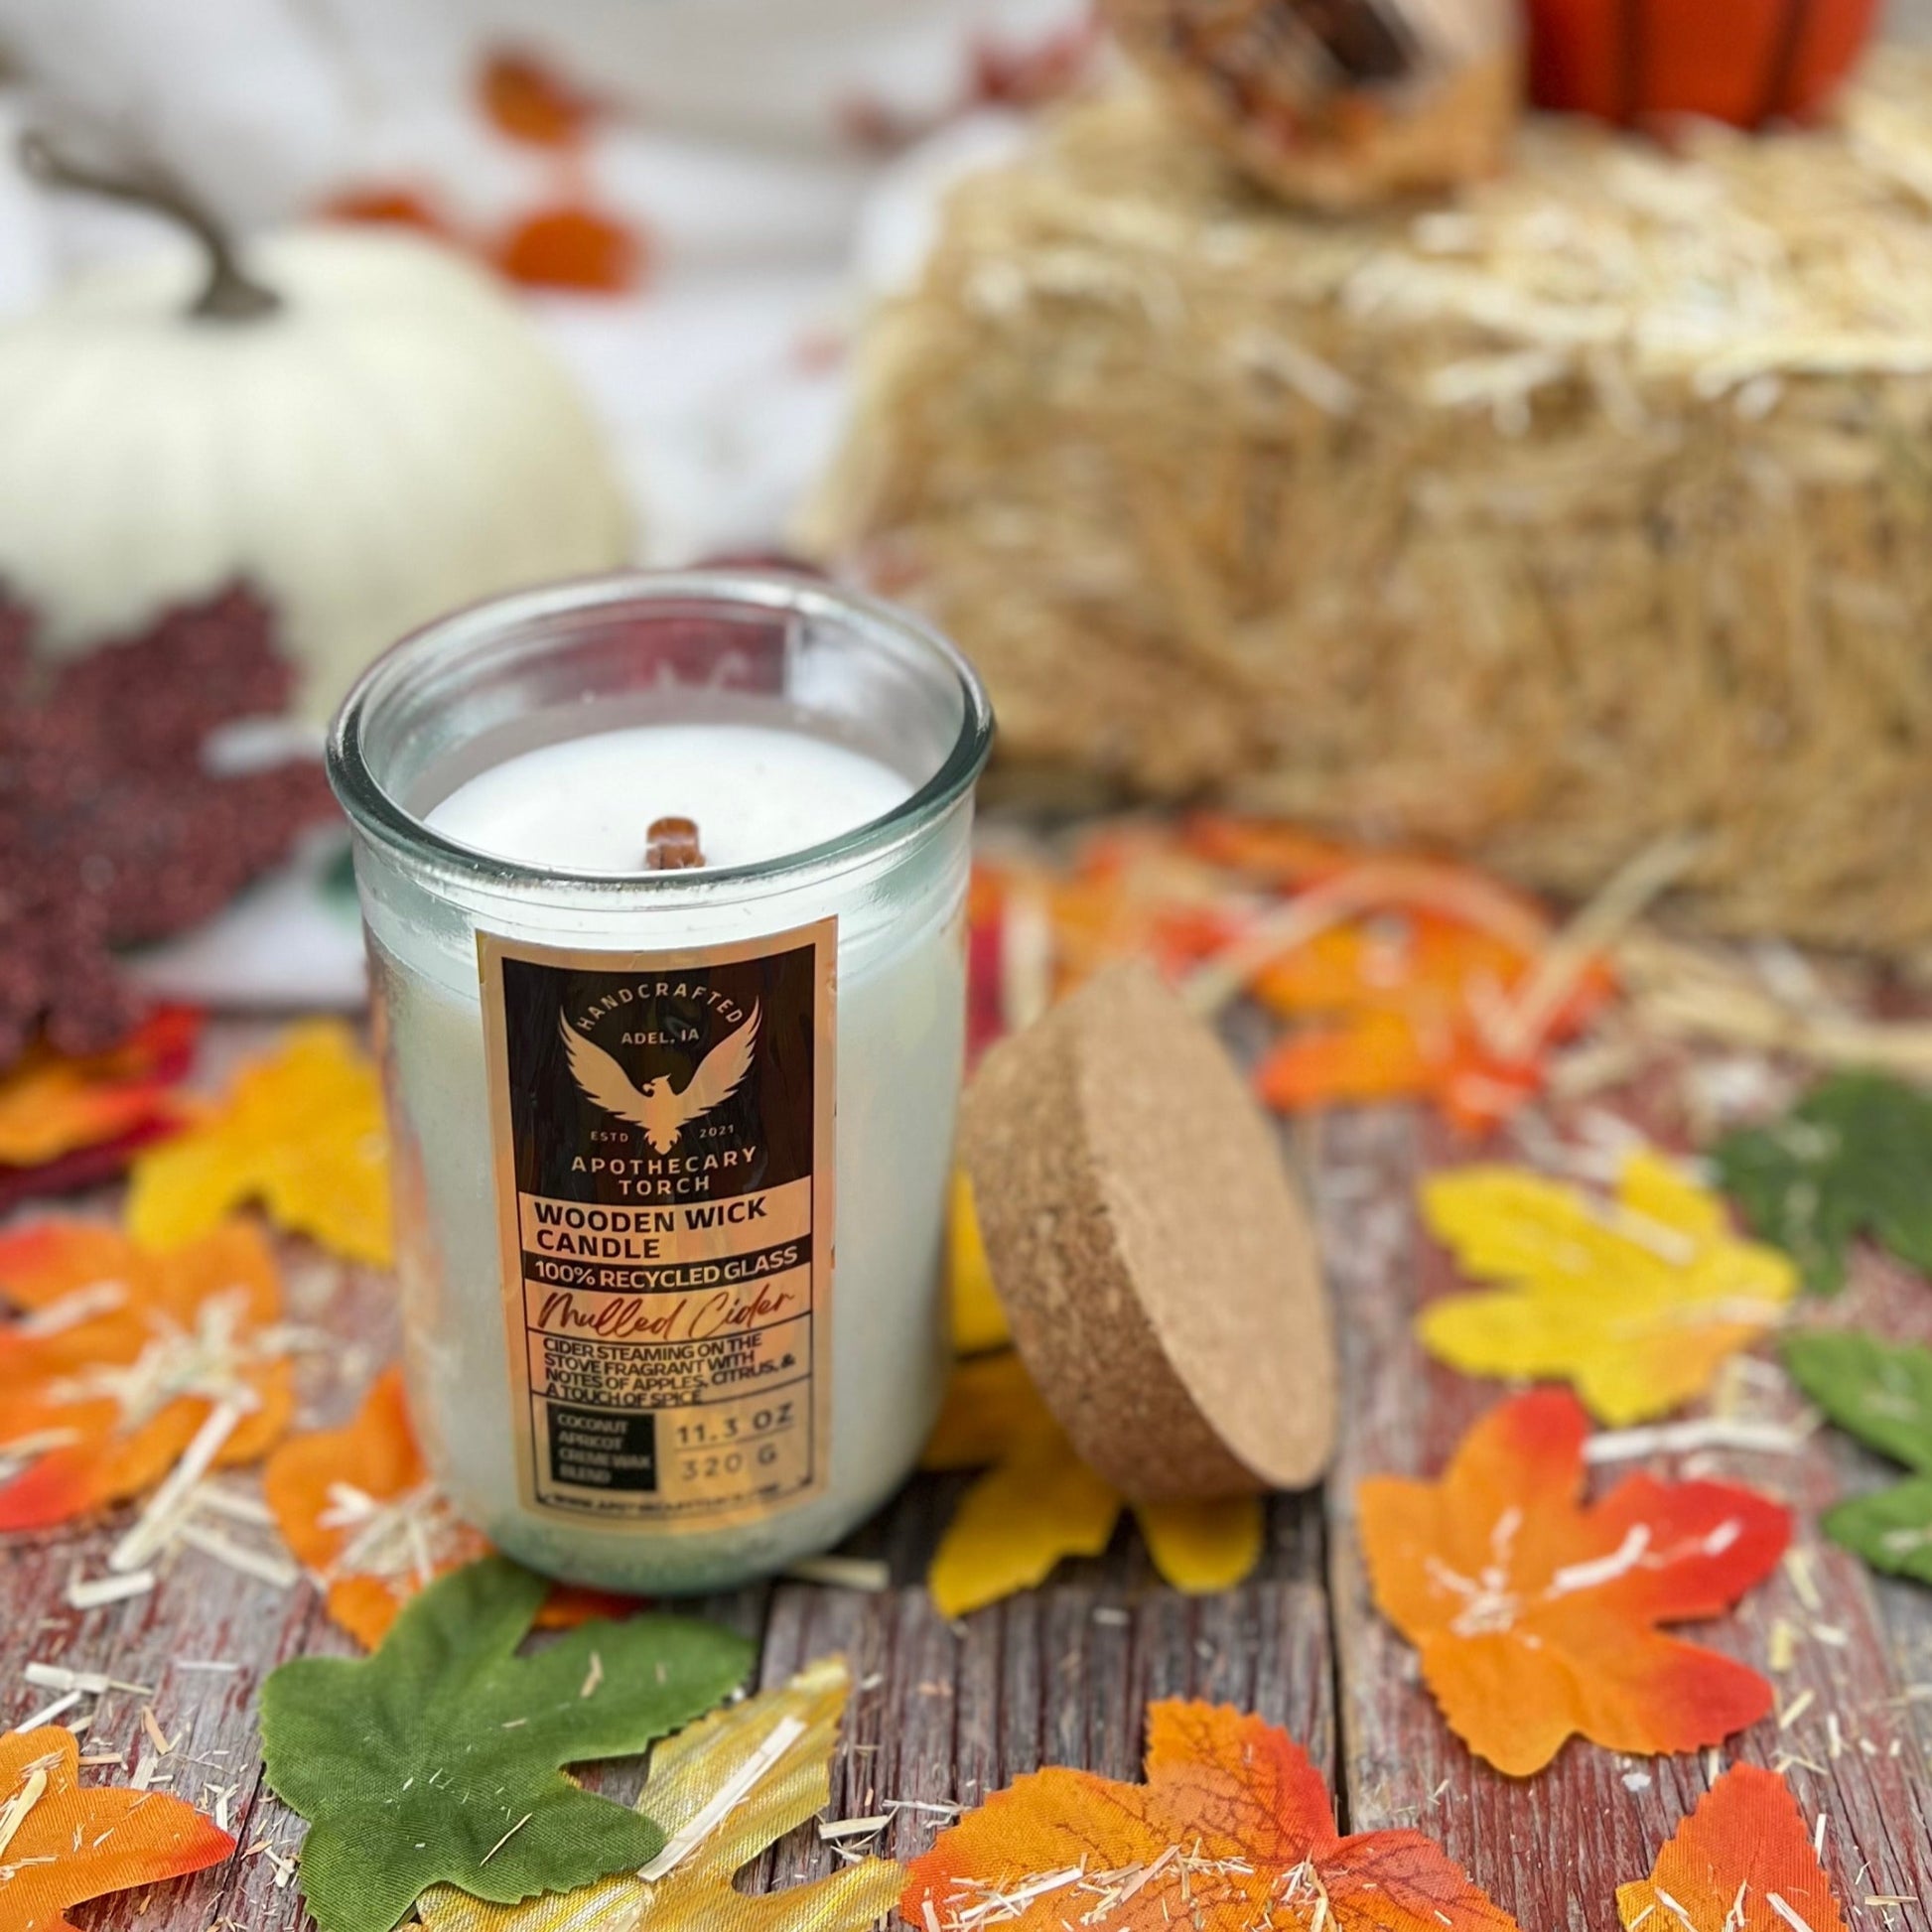 Coco-Apricot Wooden Wick Candles